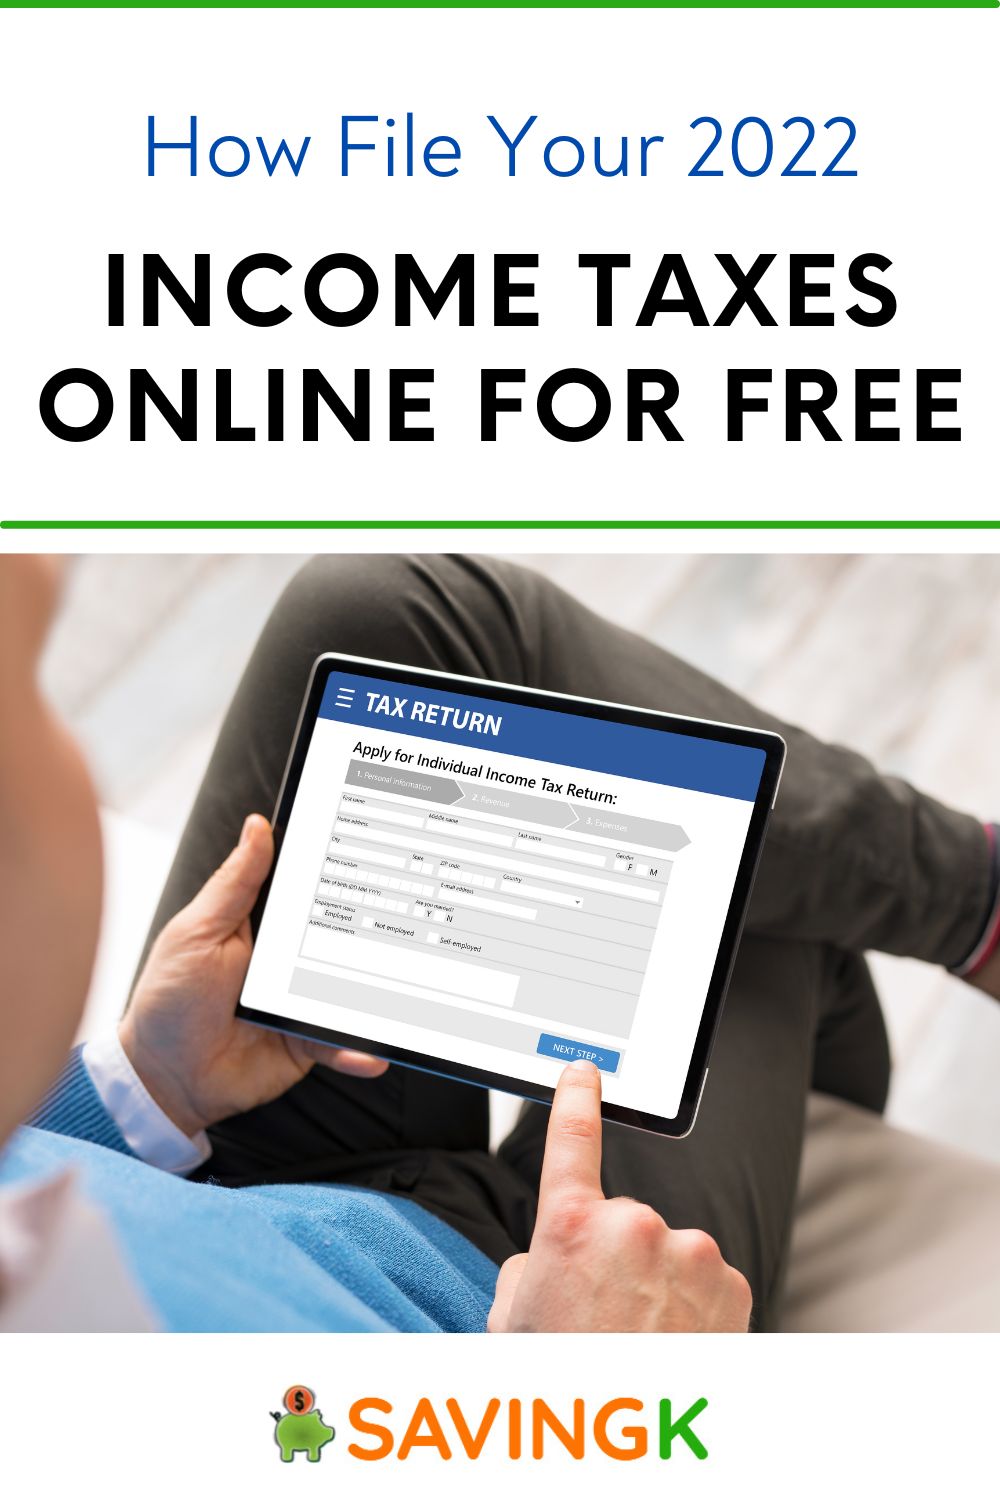 How To File Your 2022 Income Taxes Online For Free In 2023